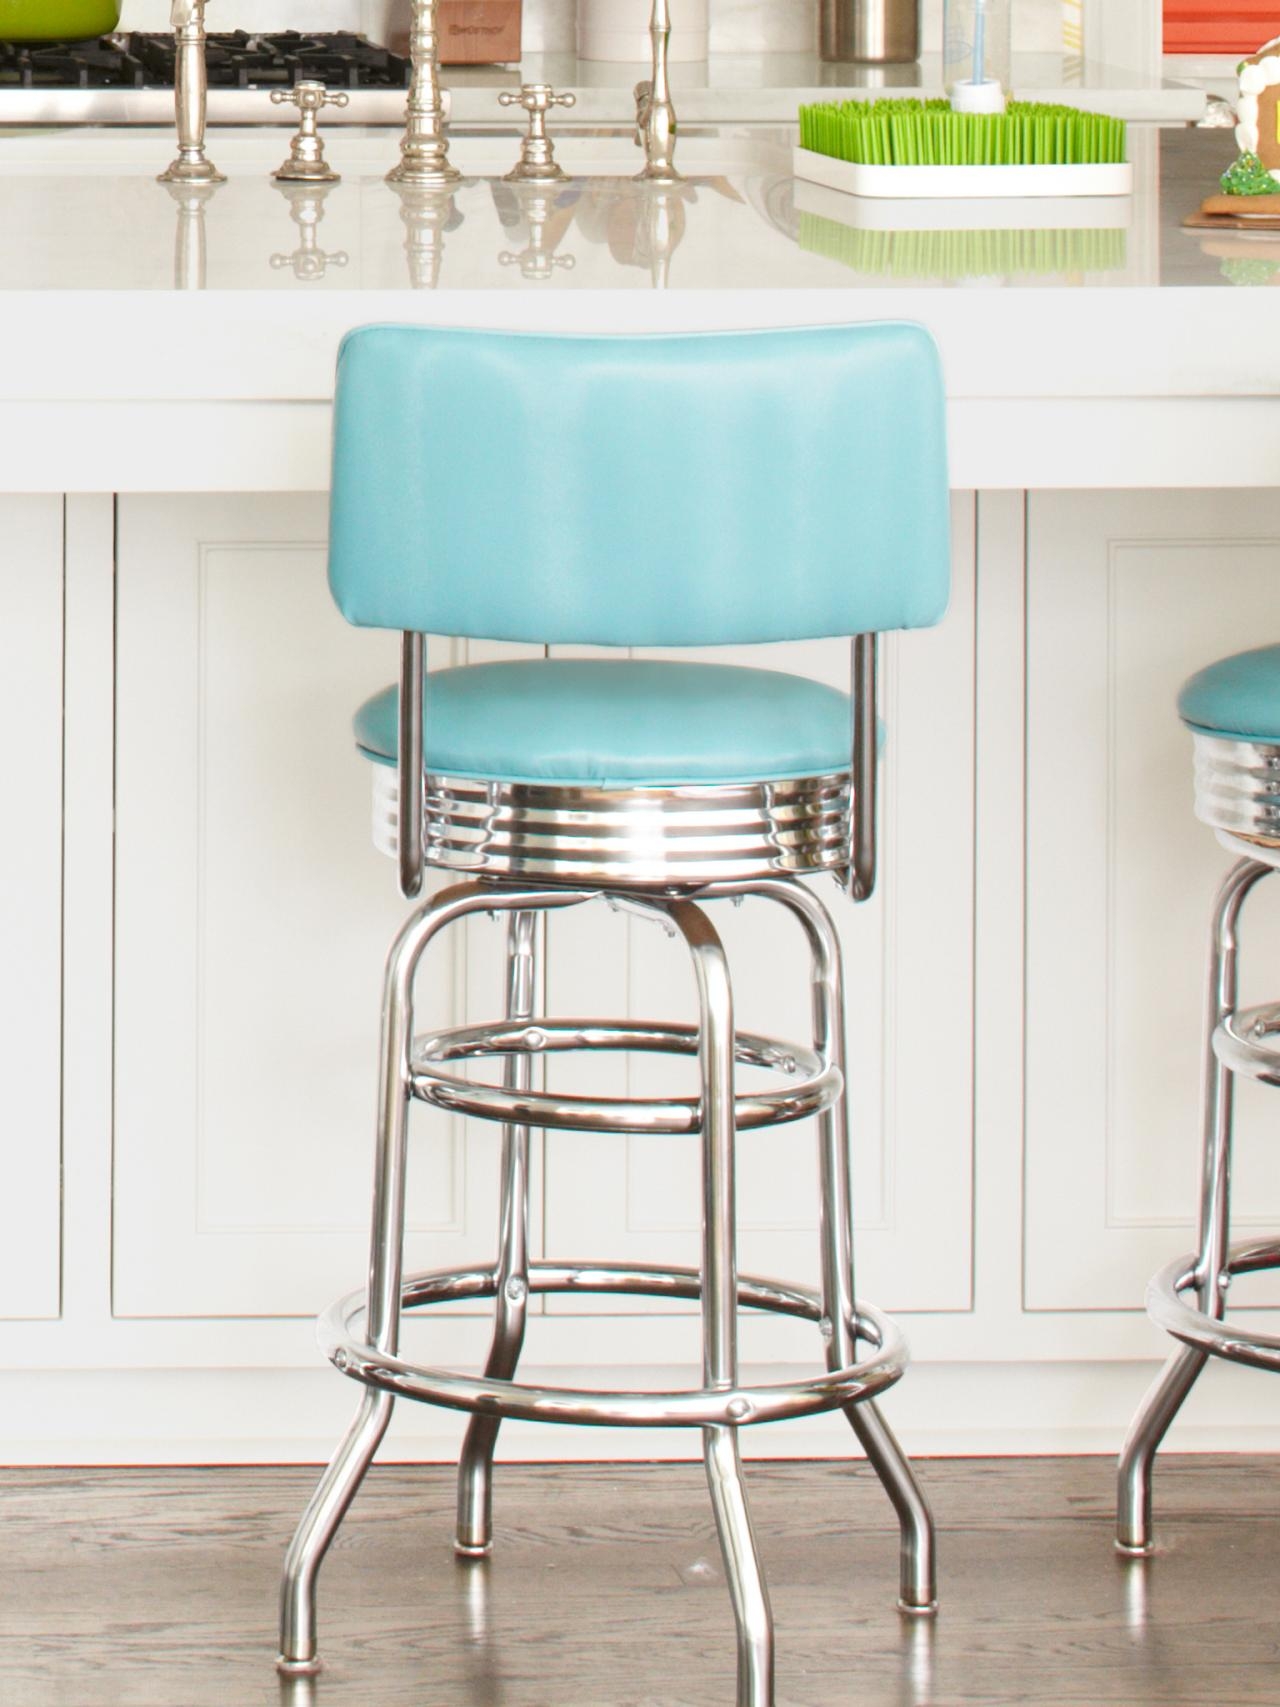 Turquoise kitchen chairs